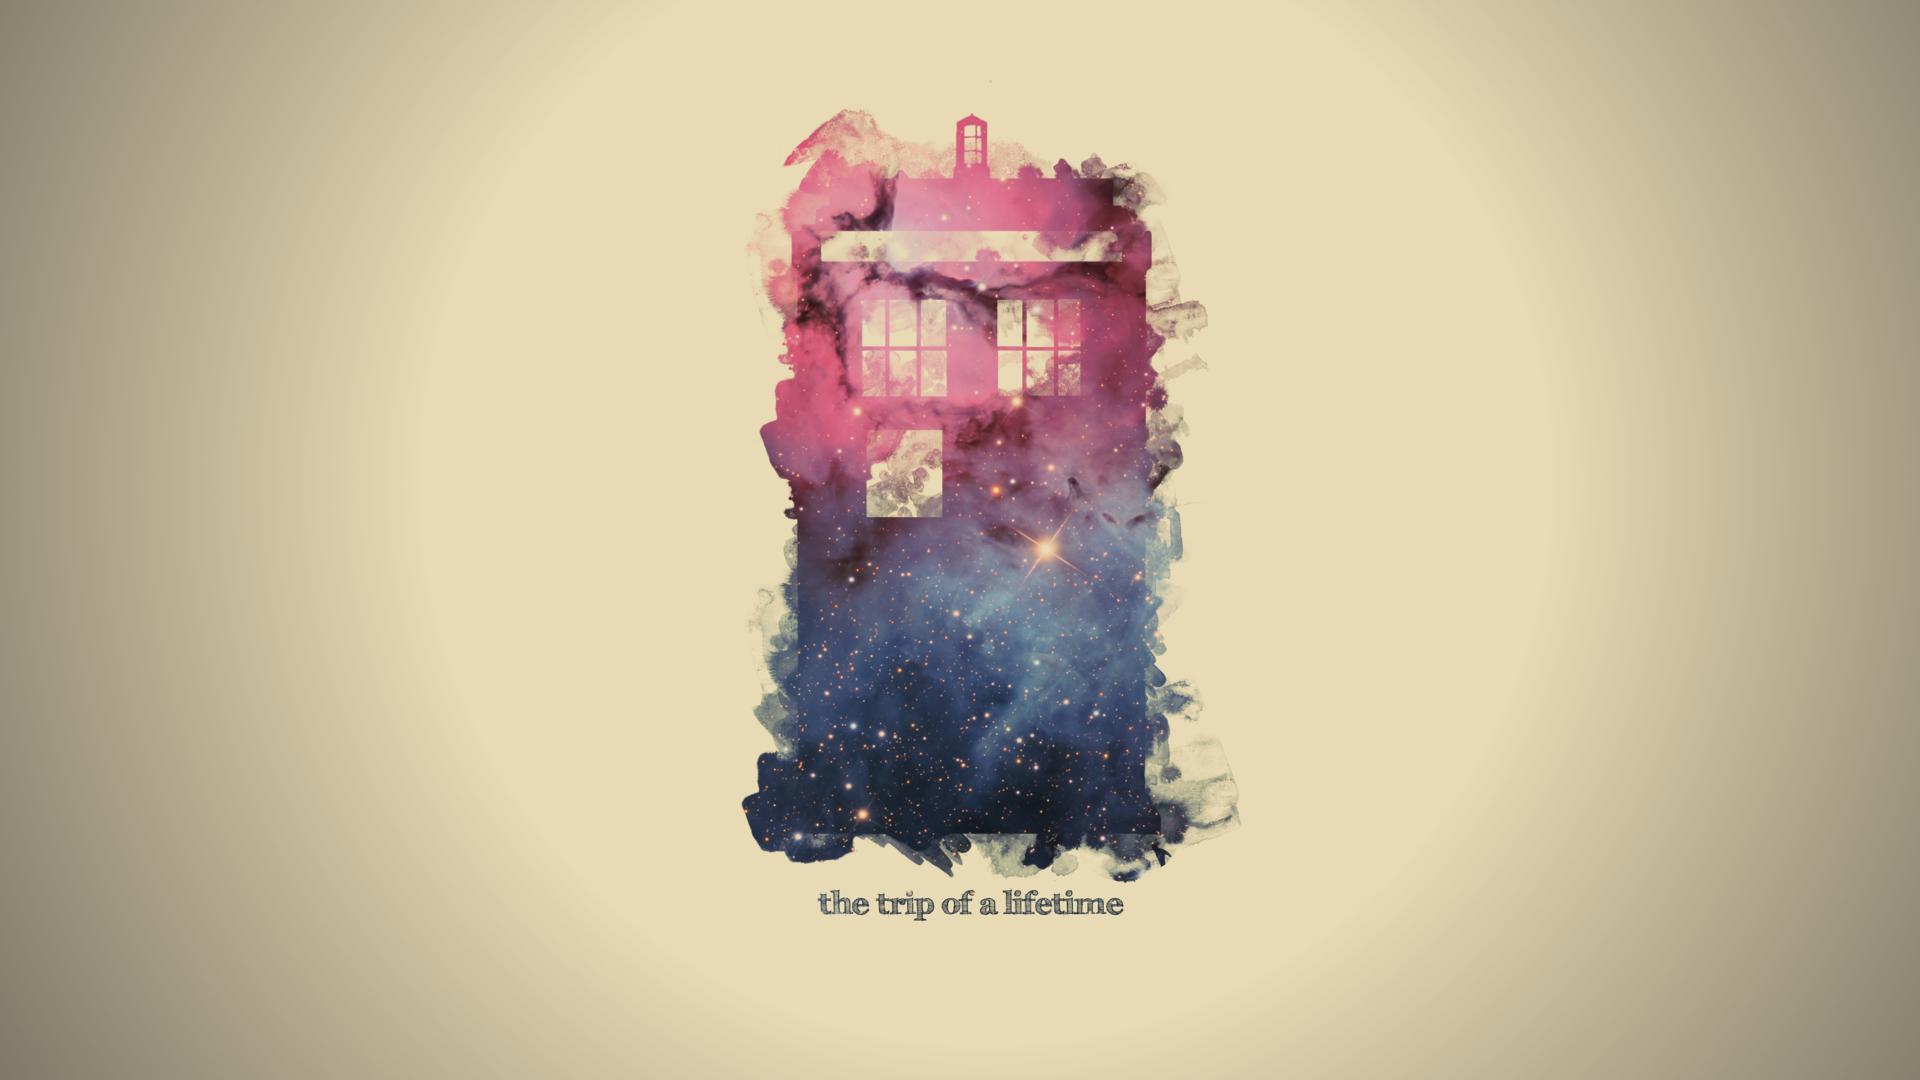 Dr Who Wallpapers